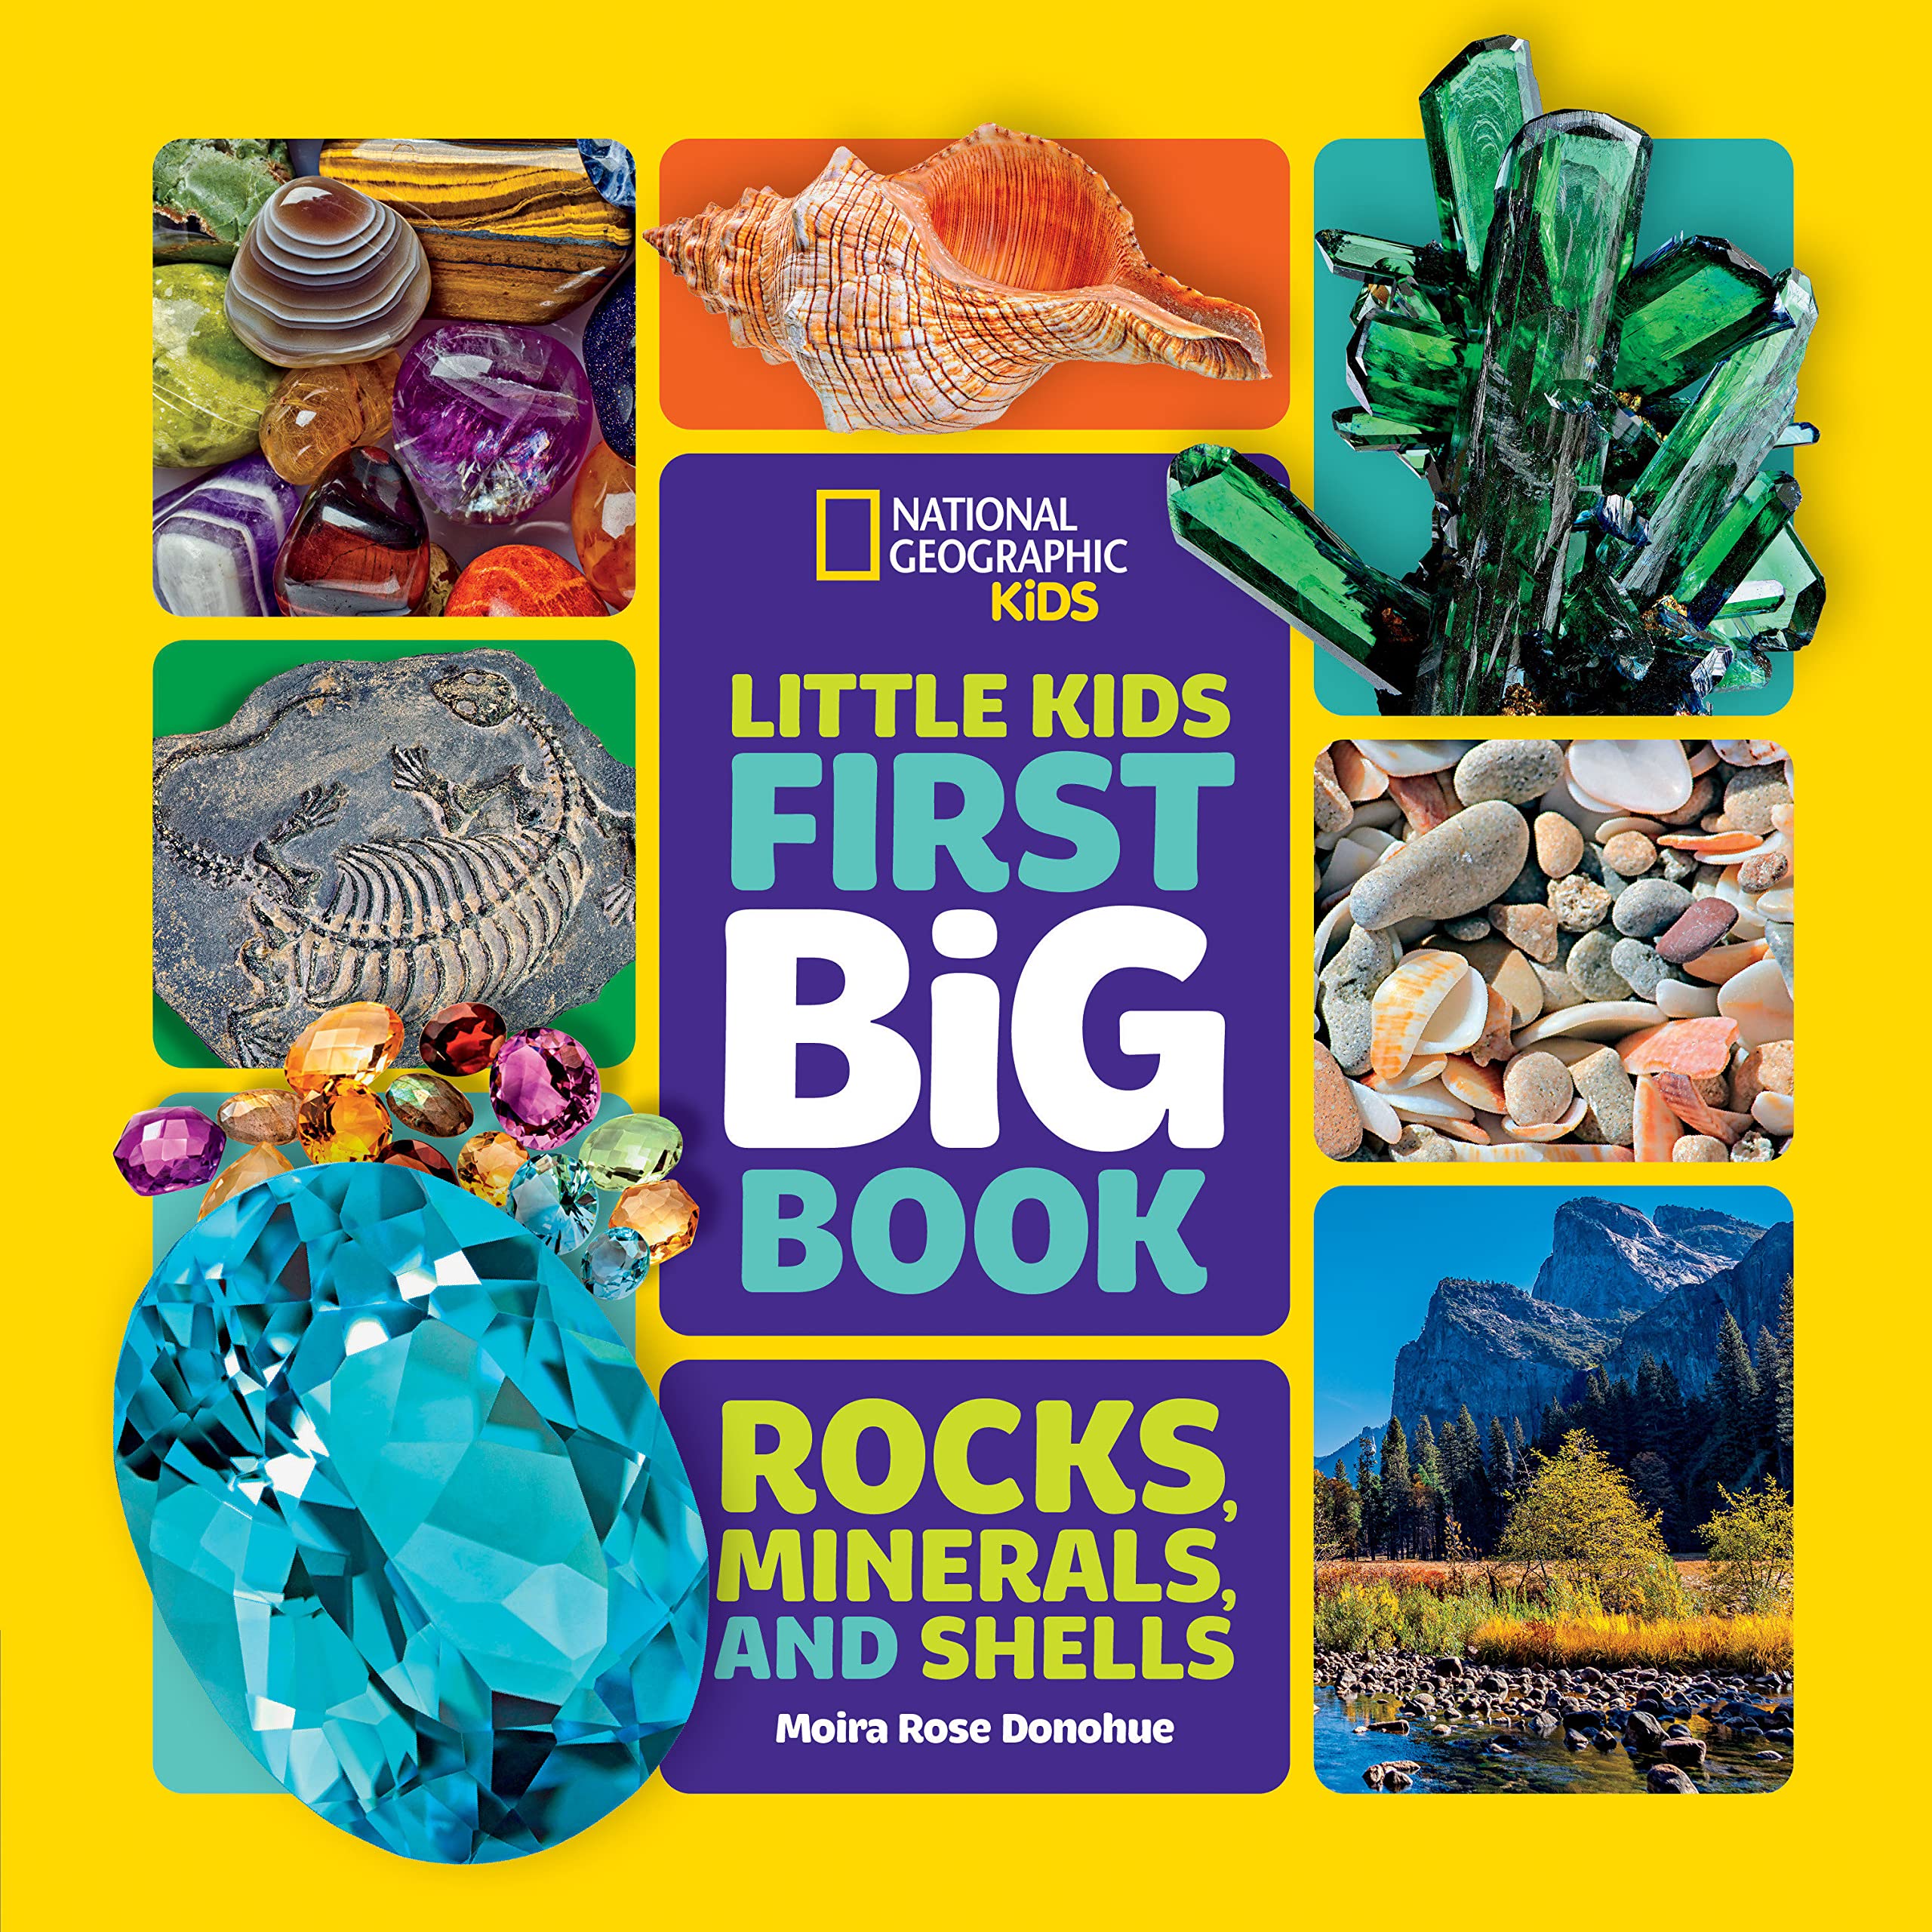 Little Kids First Big Book of Rocks, Minerals & Shells-Library edition (National Geographic Little Kids First Big Books)